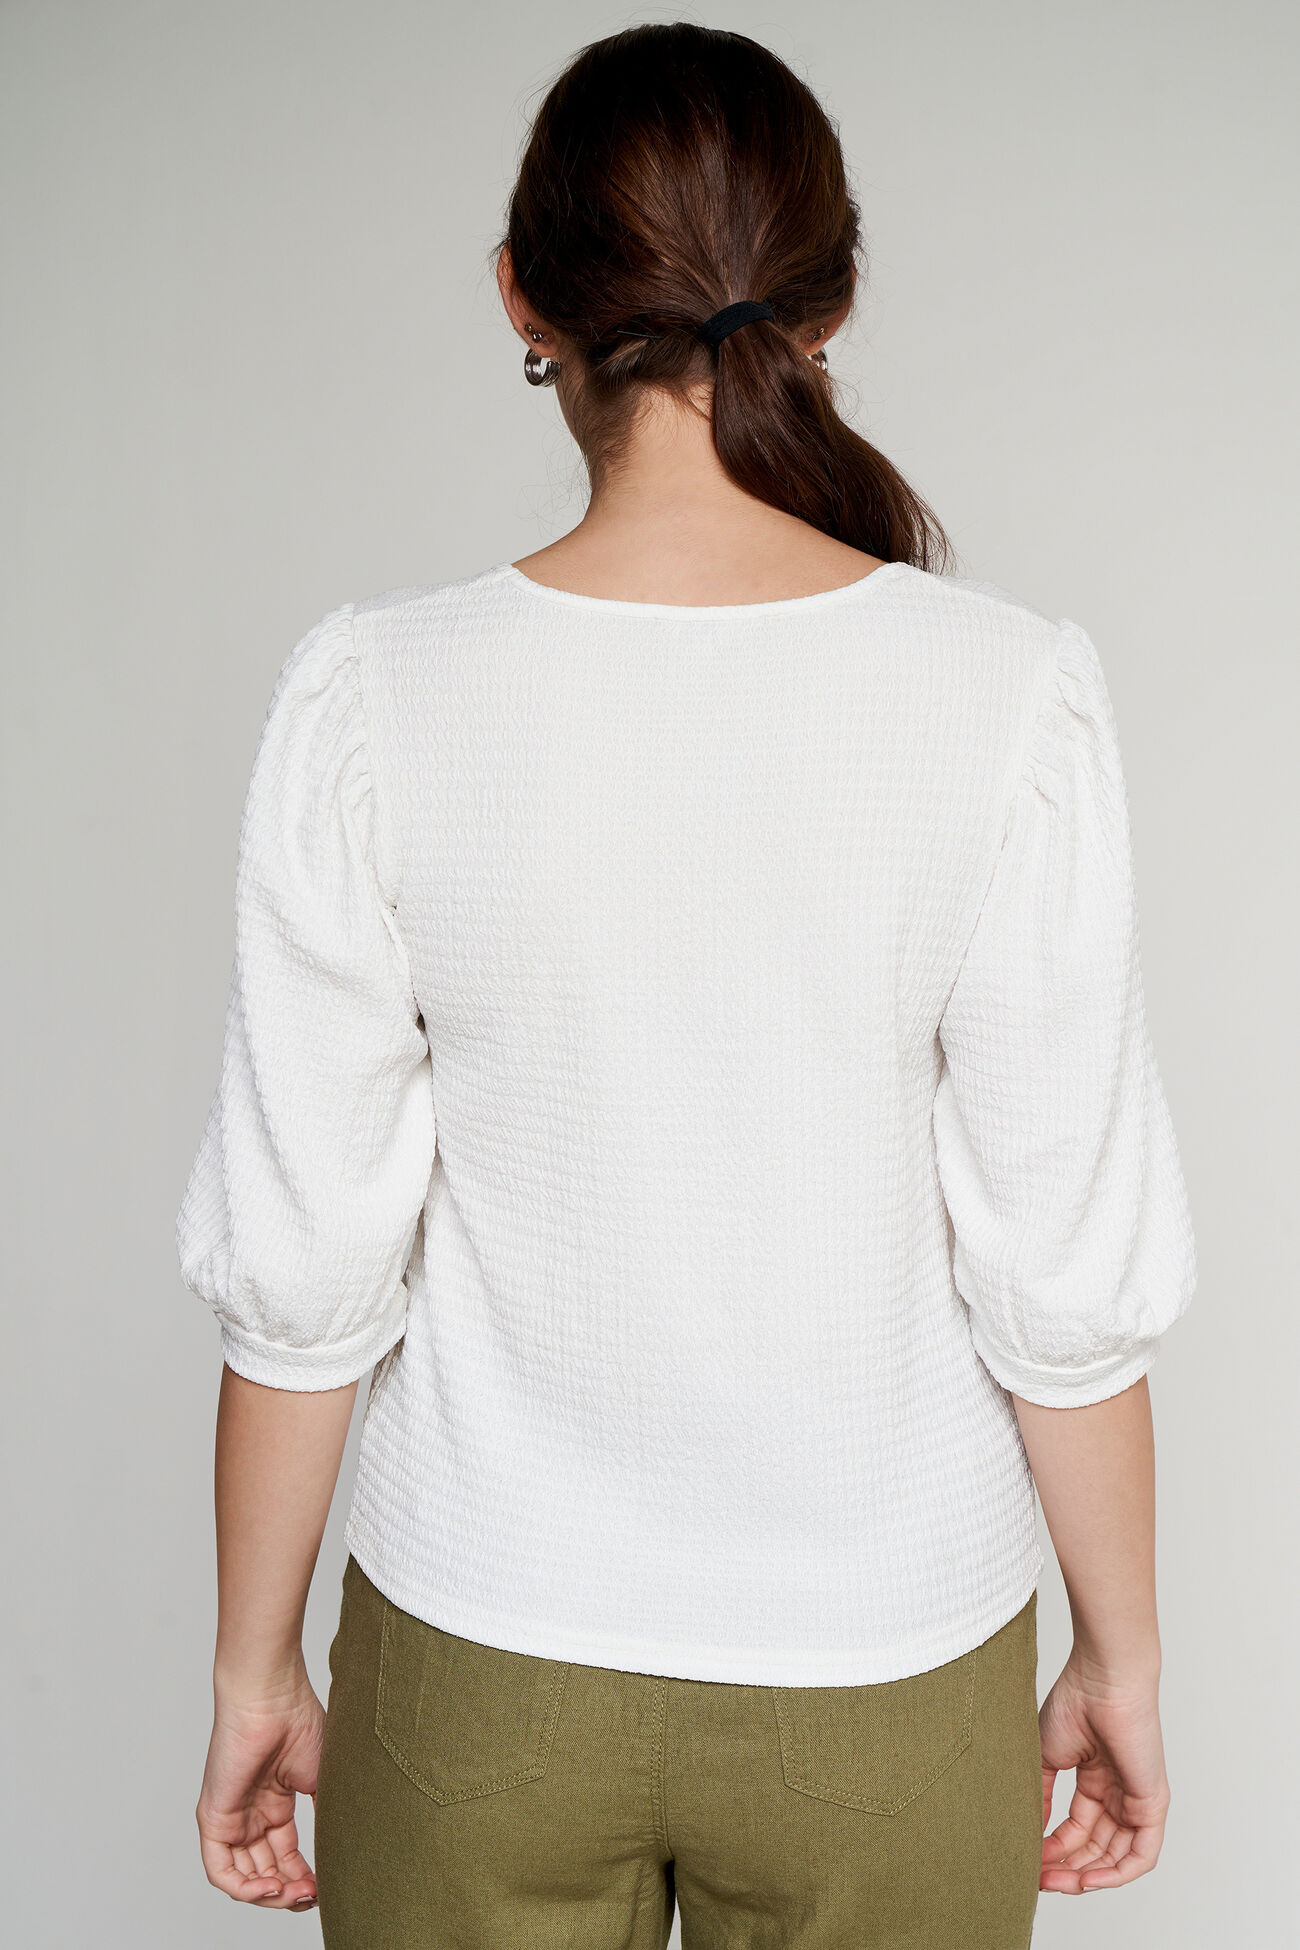 White Solid Straight Top, White, image 3